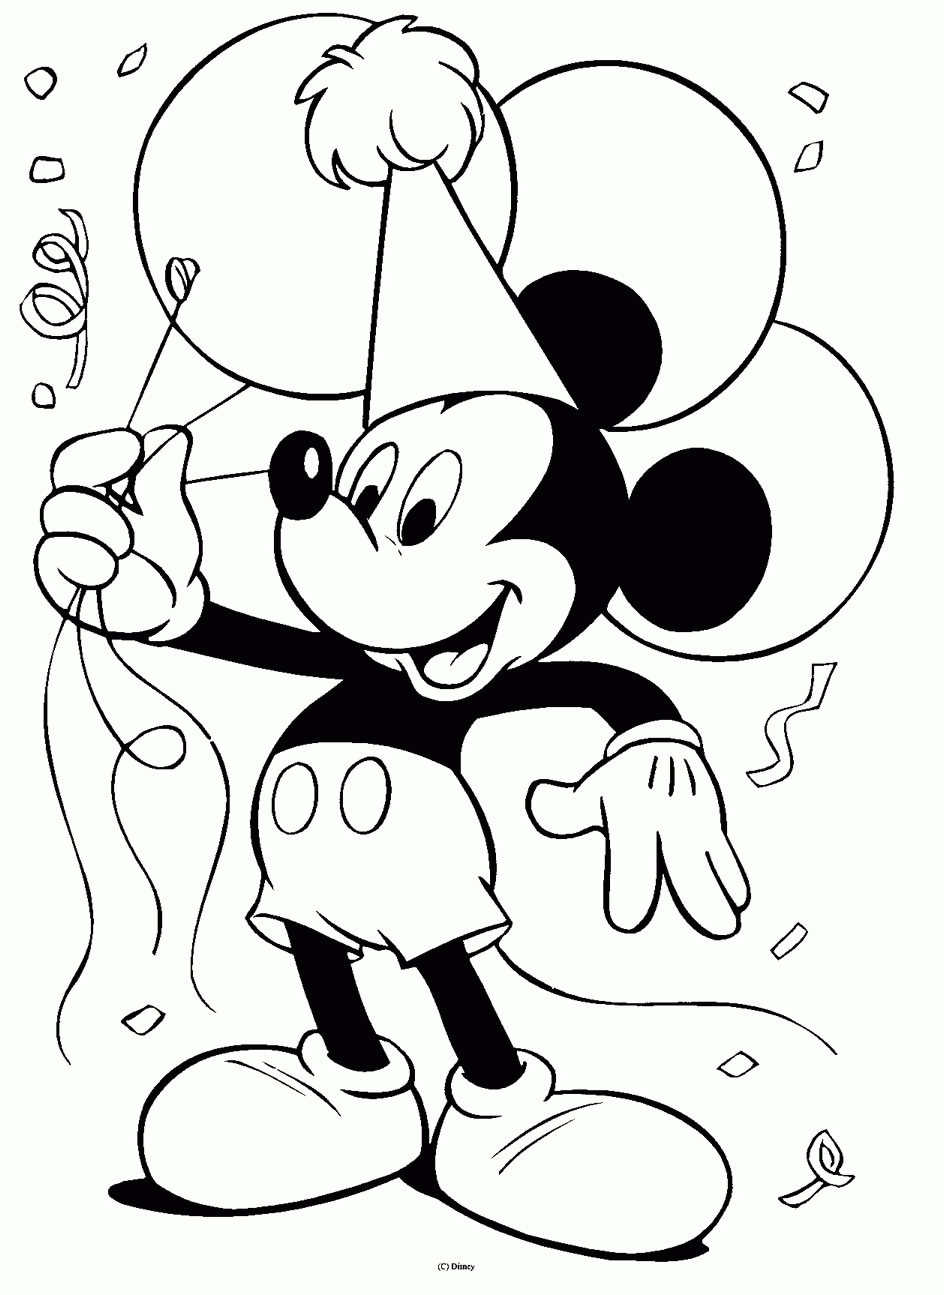 free printable mickey and minnie mouse coloring pages colour me beautiful mickey friends colouring pages minnie coloring mouse printable pages free and mickey 